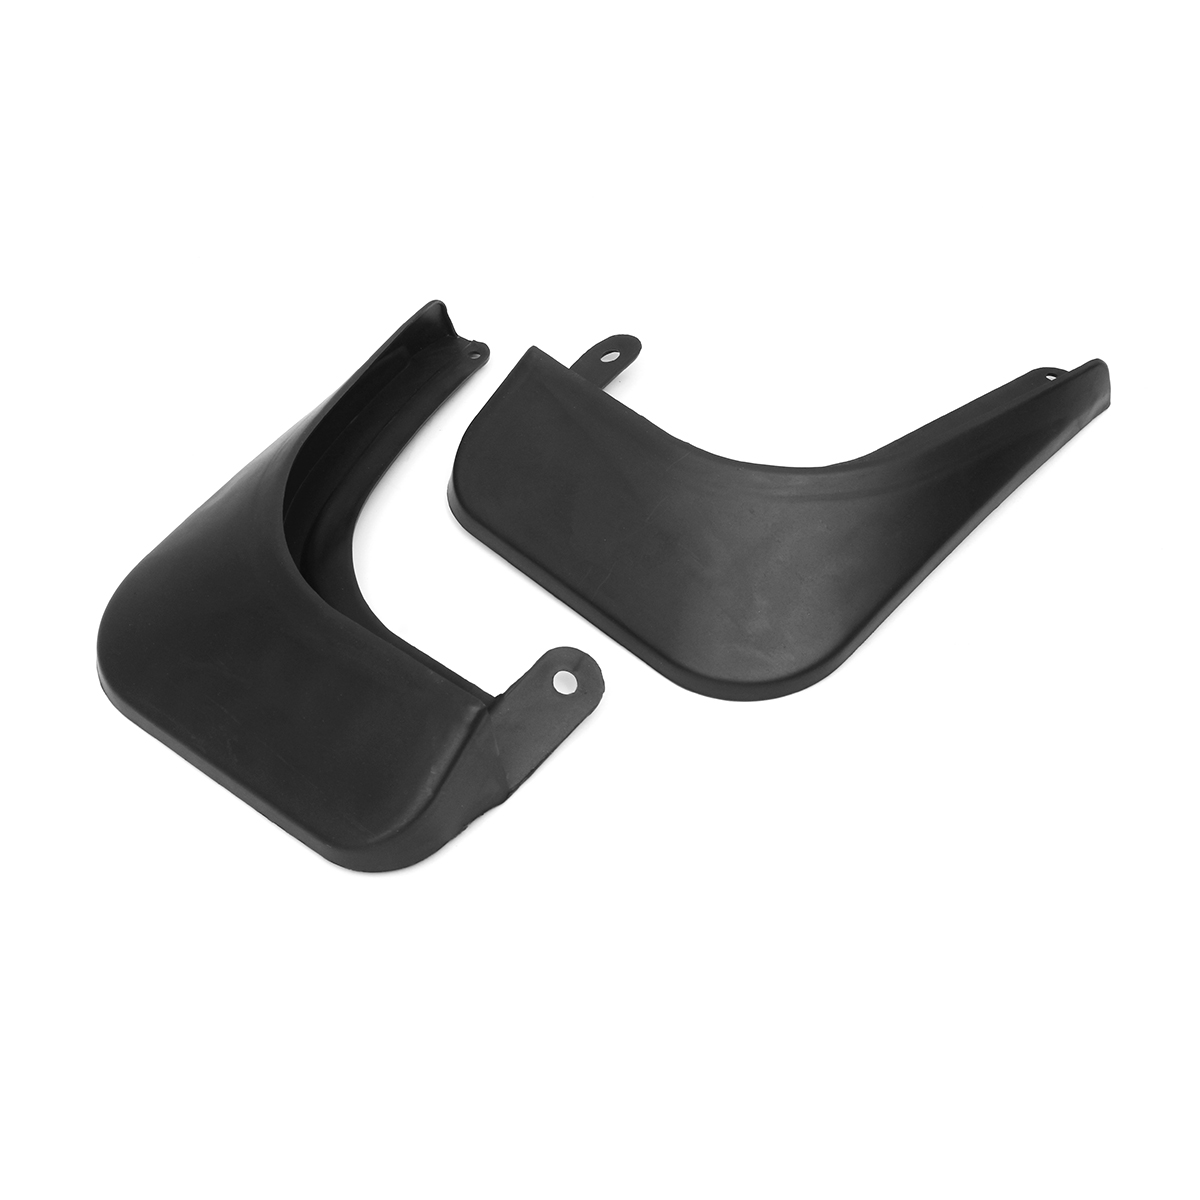 Front-And-Rear-Mud-Flaps-Car-Mudguards-For-Geely-Emgrand-2018-1389129